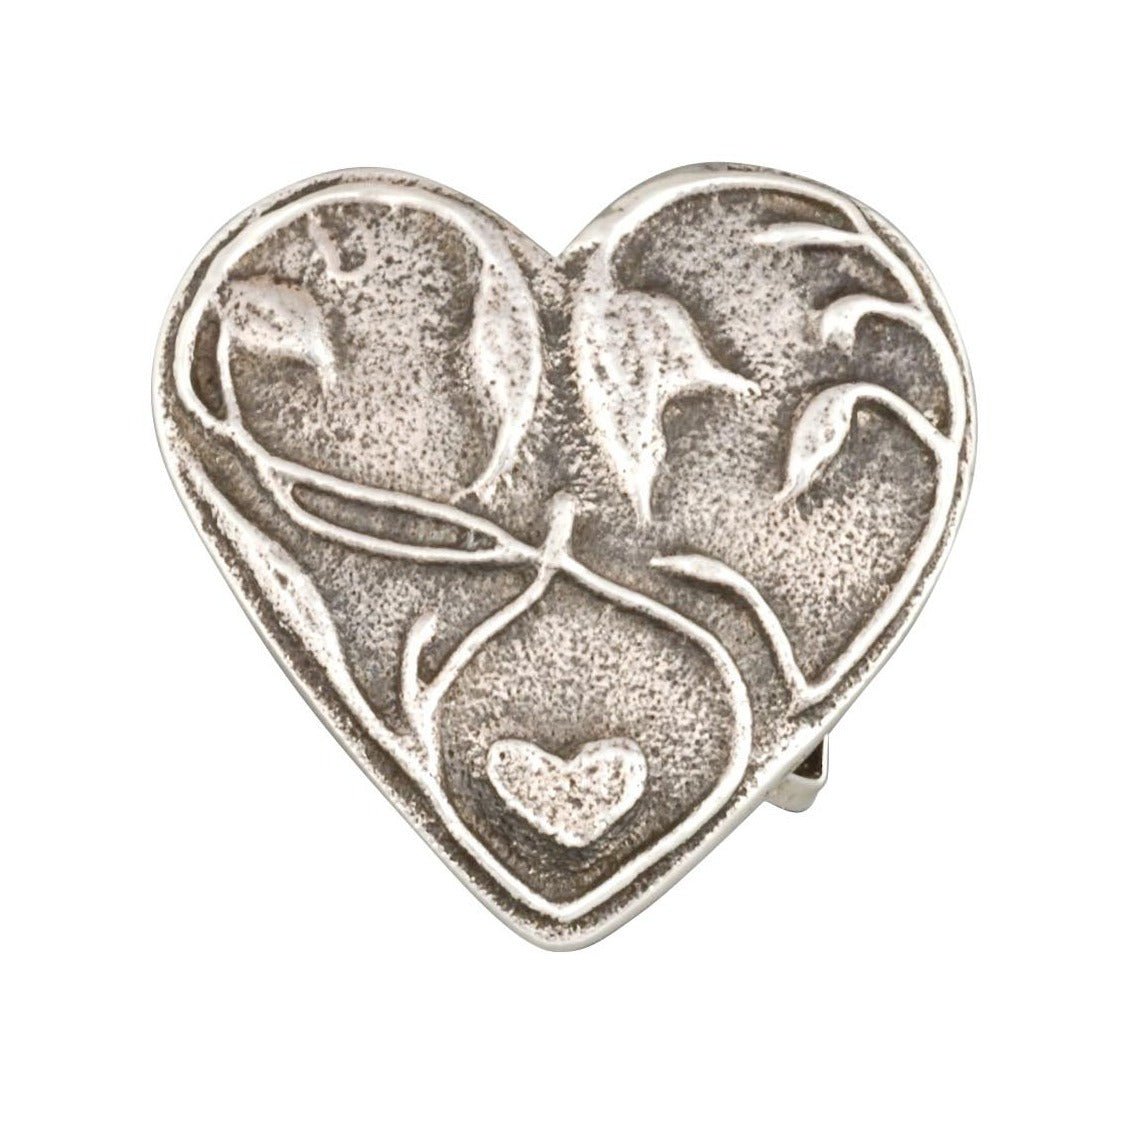 Ira Custer Buckle of Sterling Silver Heart - Turquoise & Tufa